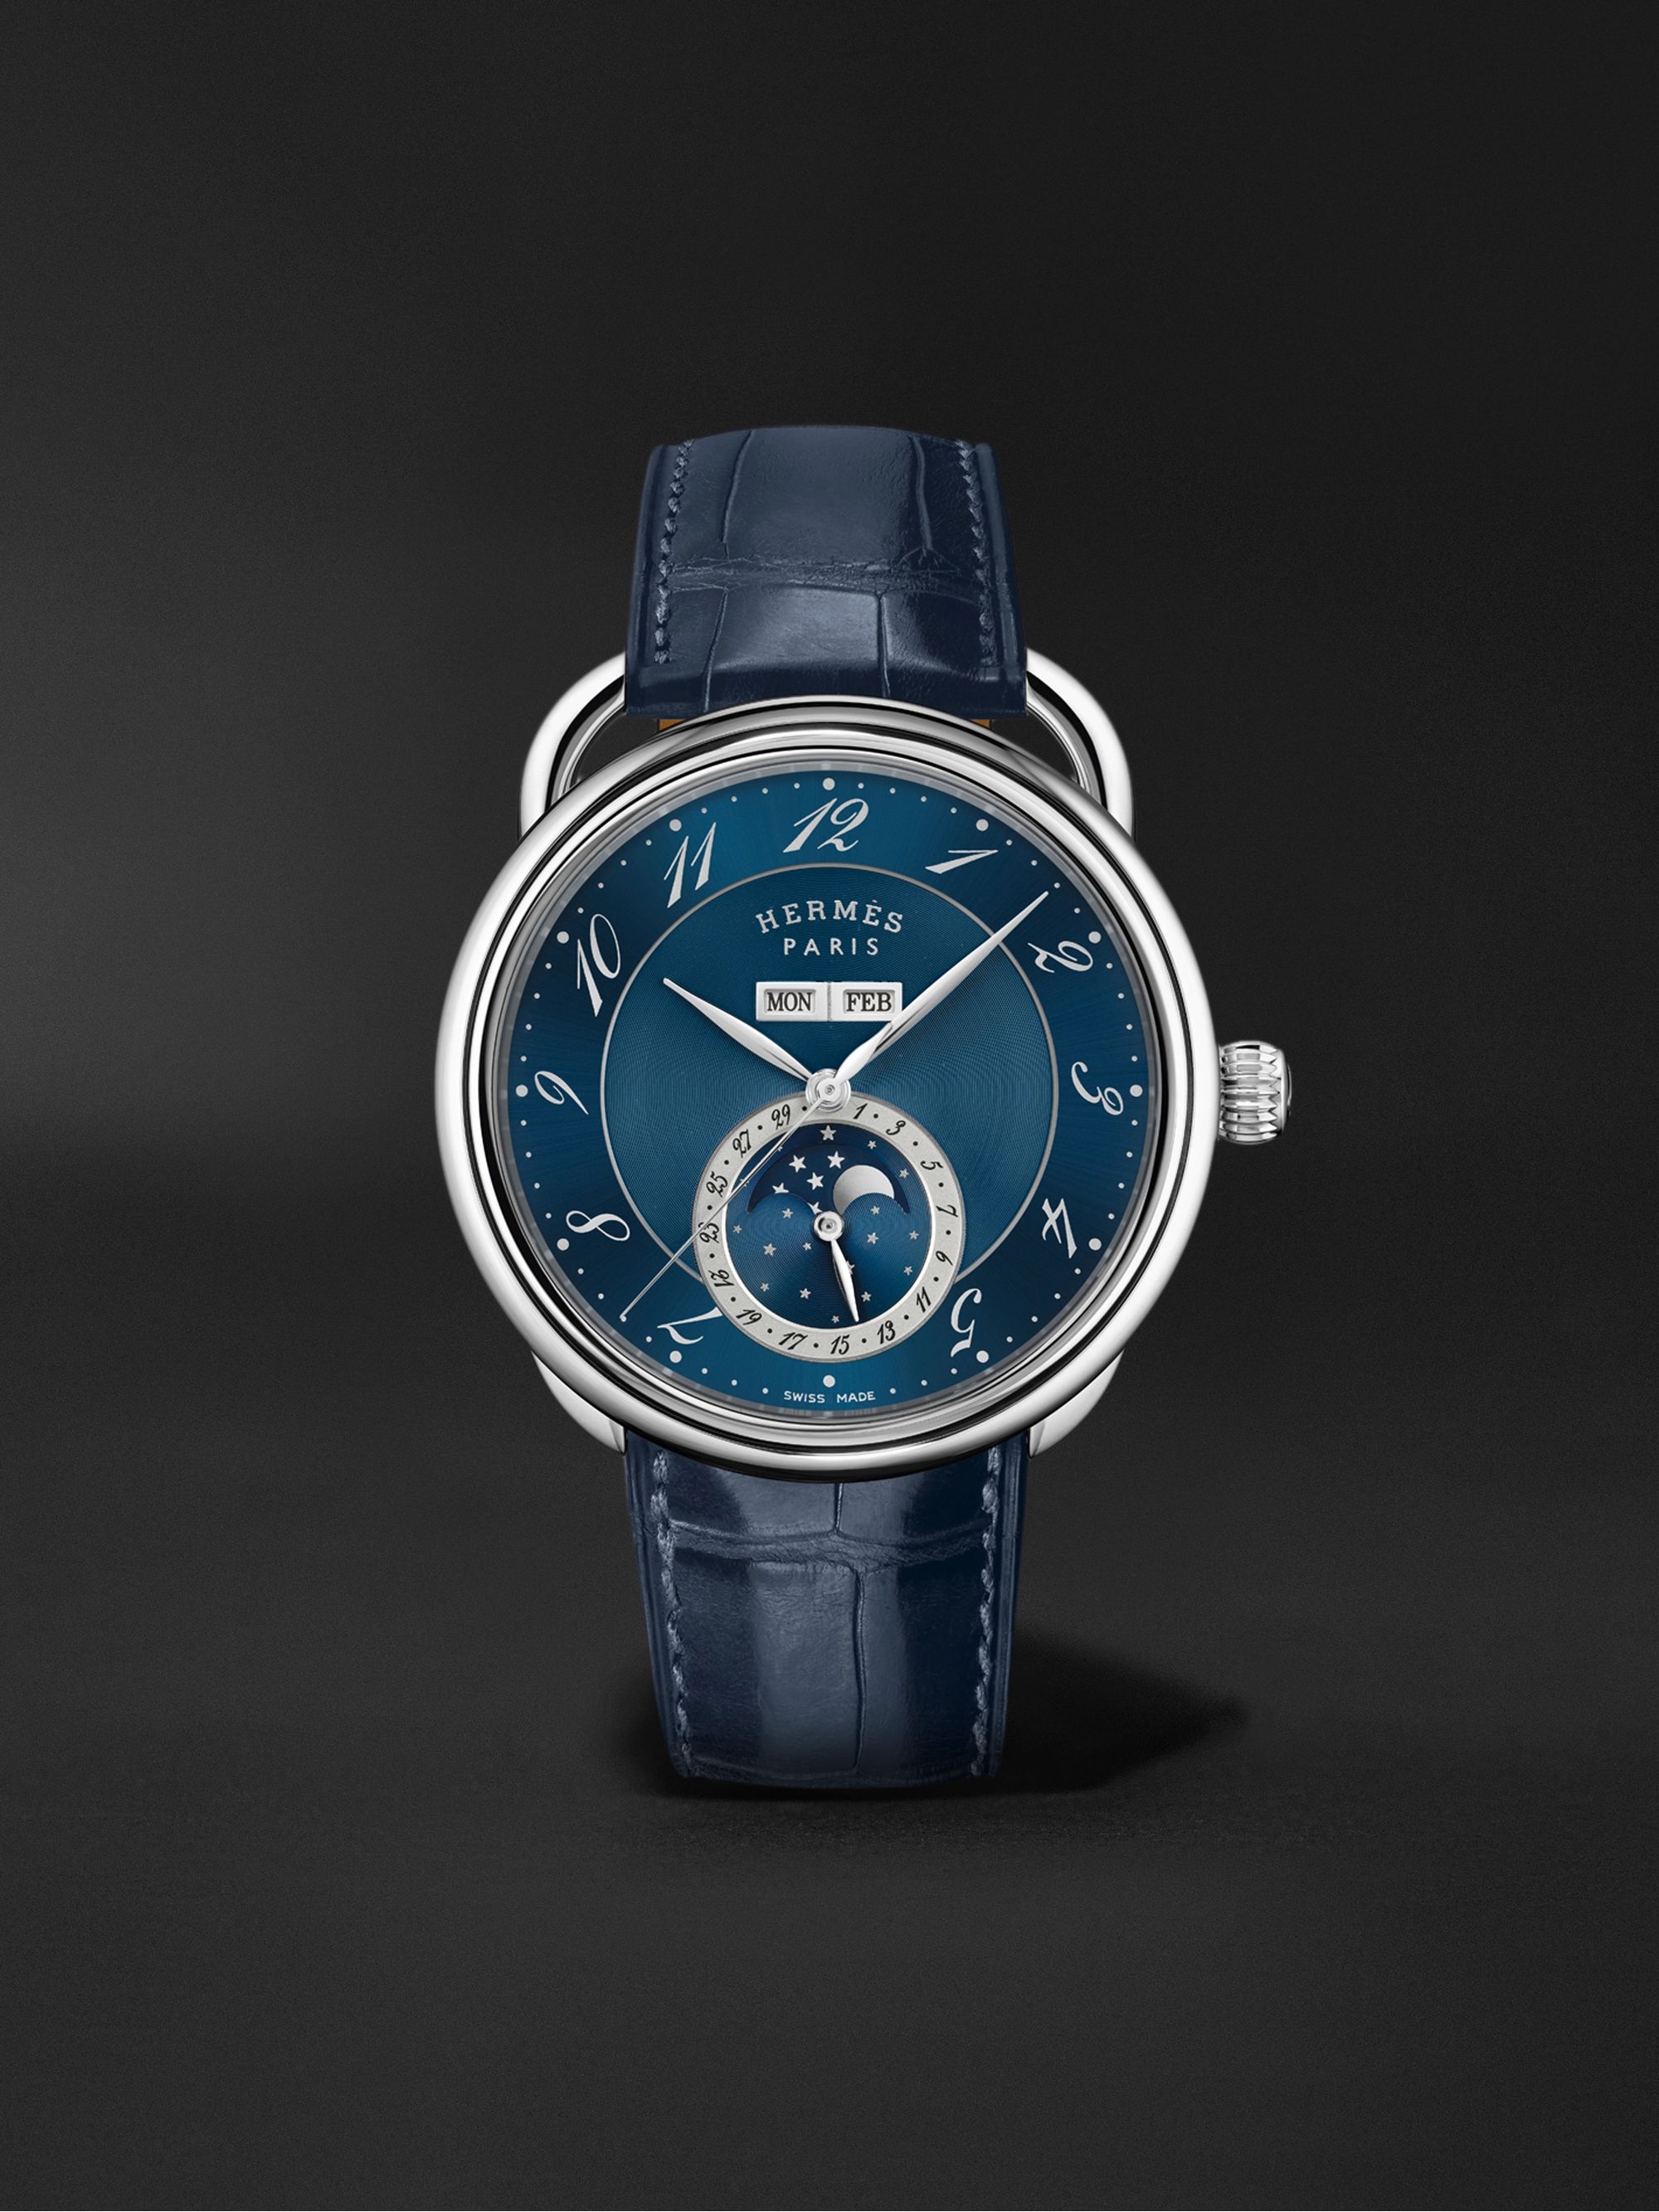 HERMÈS TIMEPIECES Arceau Grande Lune Automatic Moon-Phase 43mm Steel and Alligator Watch, Ref. No. 053222WW00